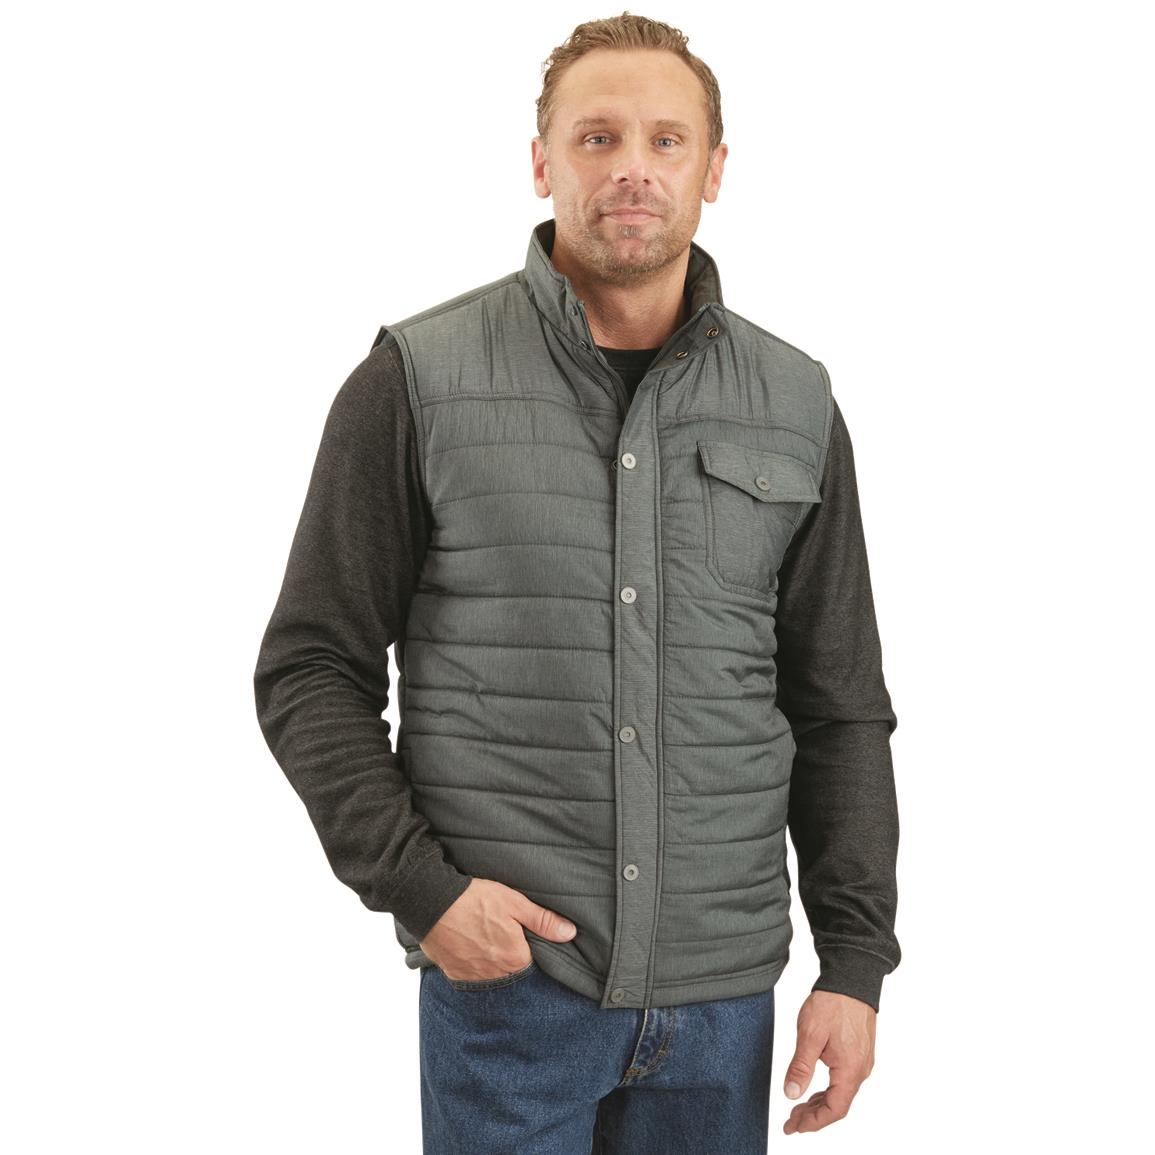 DKOTA GRIZZLY Men's Locke Insulated Lined Vest, Crocodile